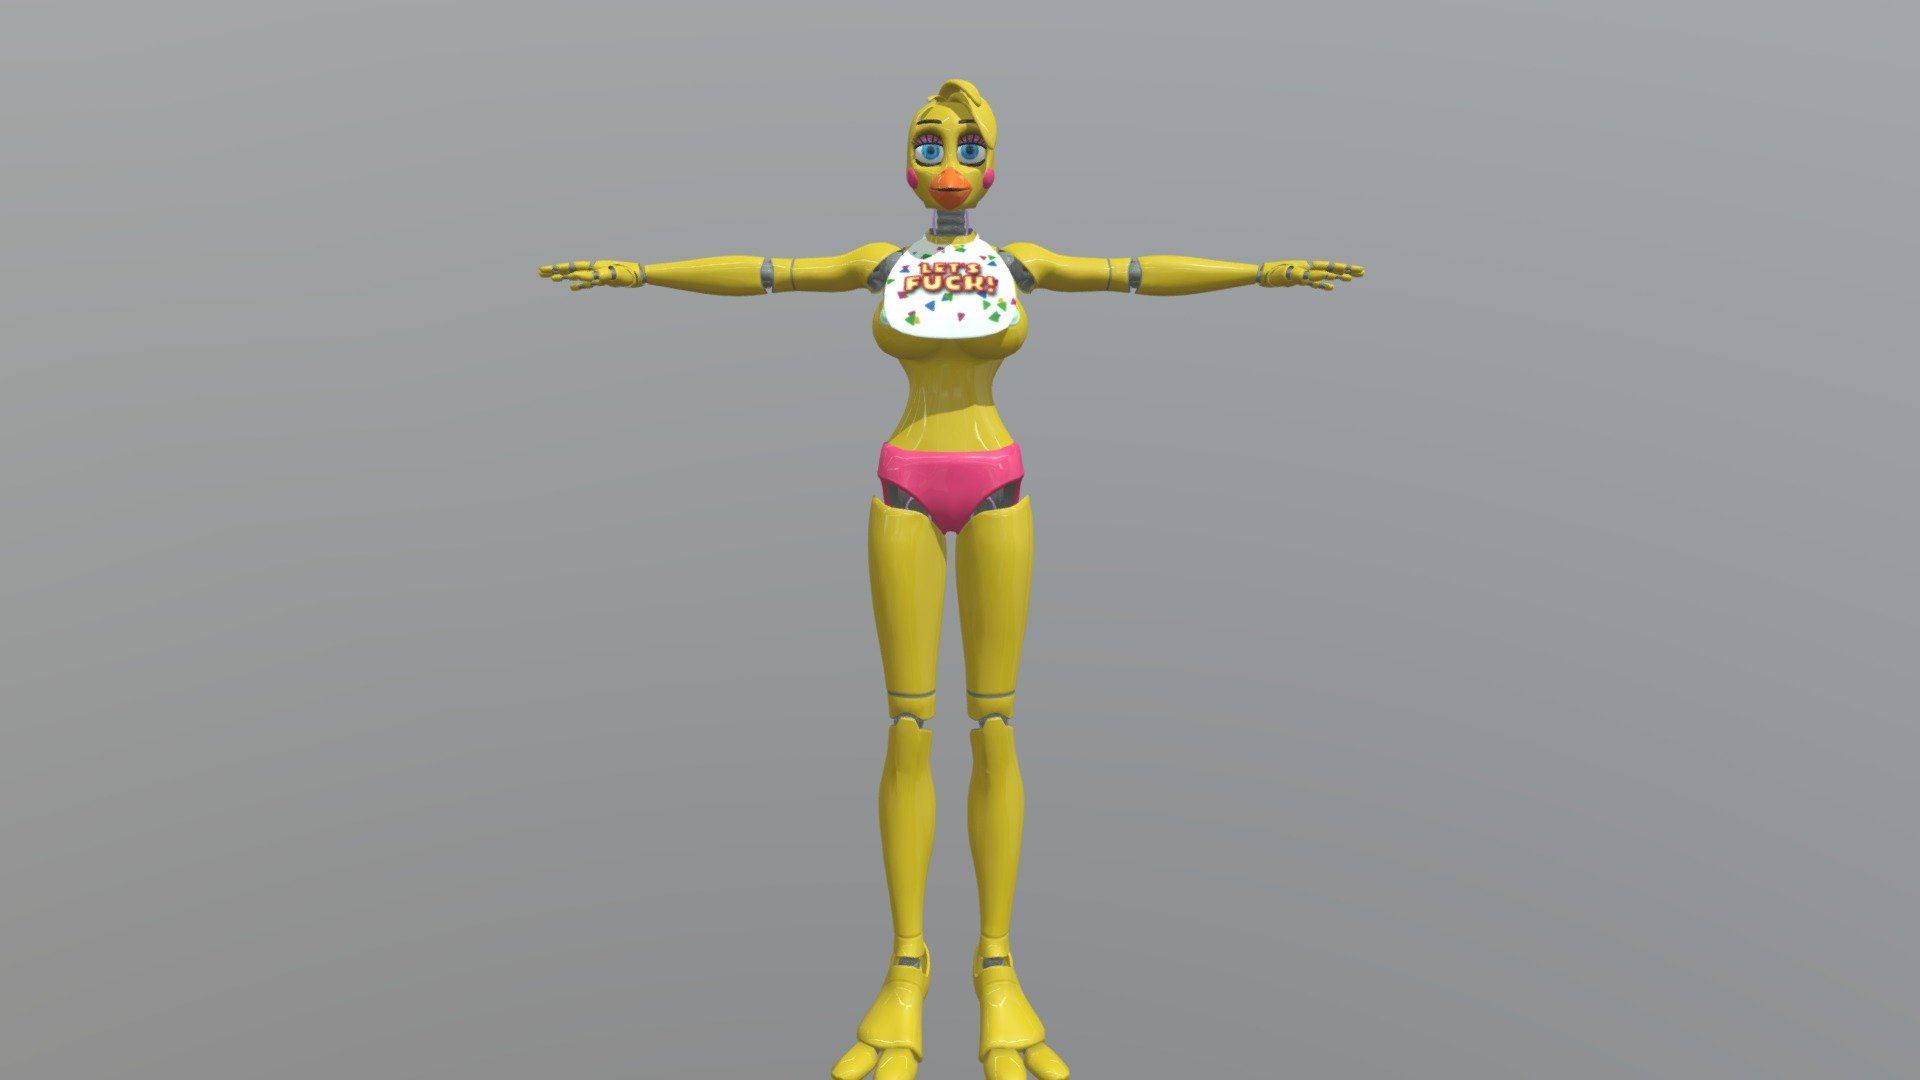 Sexy animatronic model

20 Followers and I will open access to download!! - Chica Sexy - 3D model by SuNsH1Ne (@ZlOy.Blood) 3d model